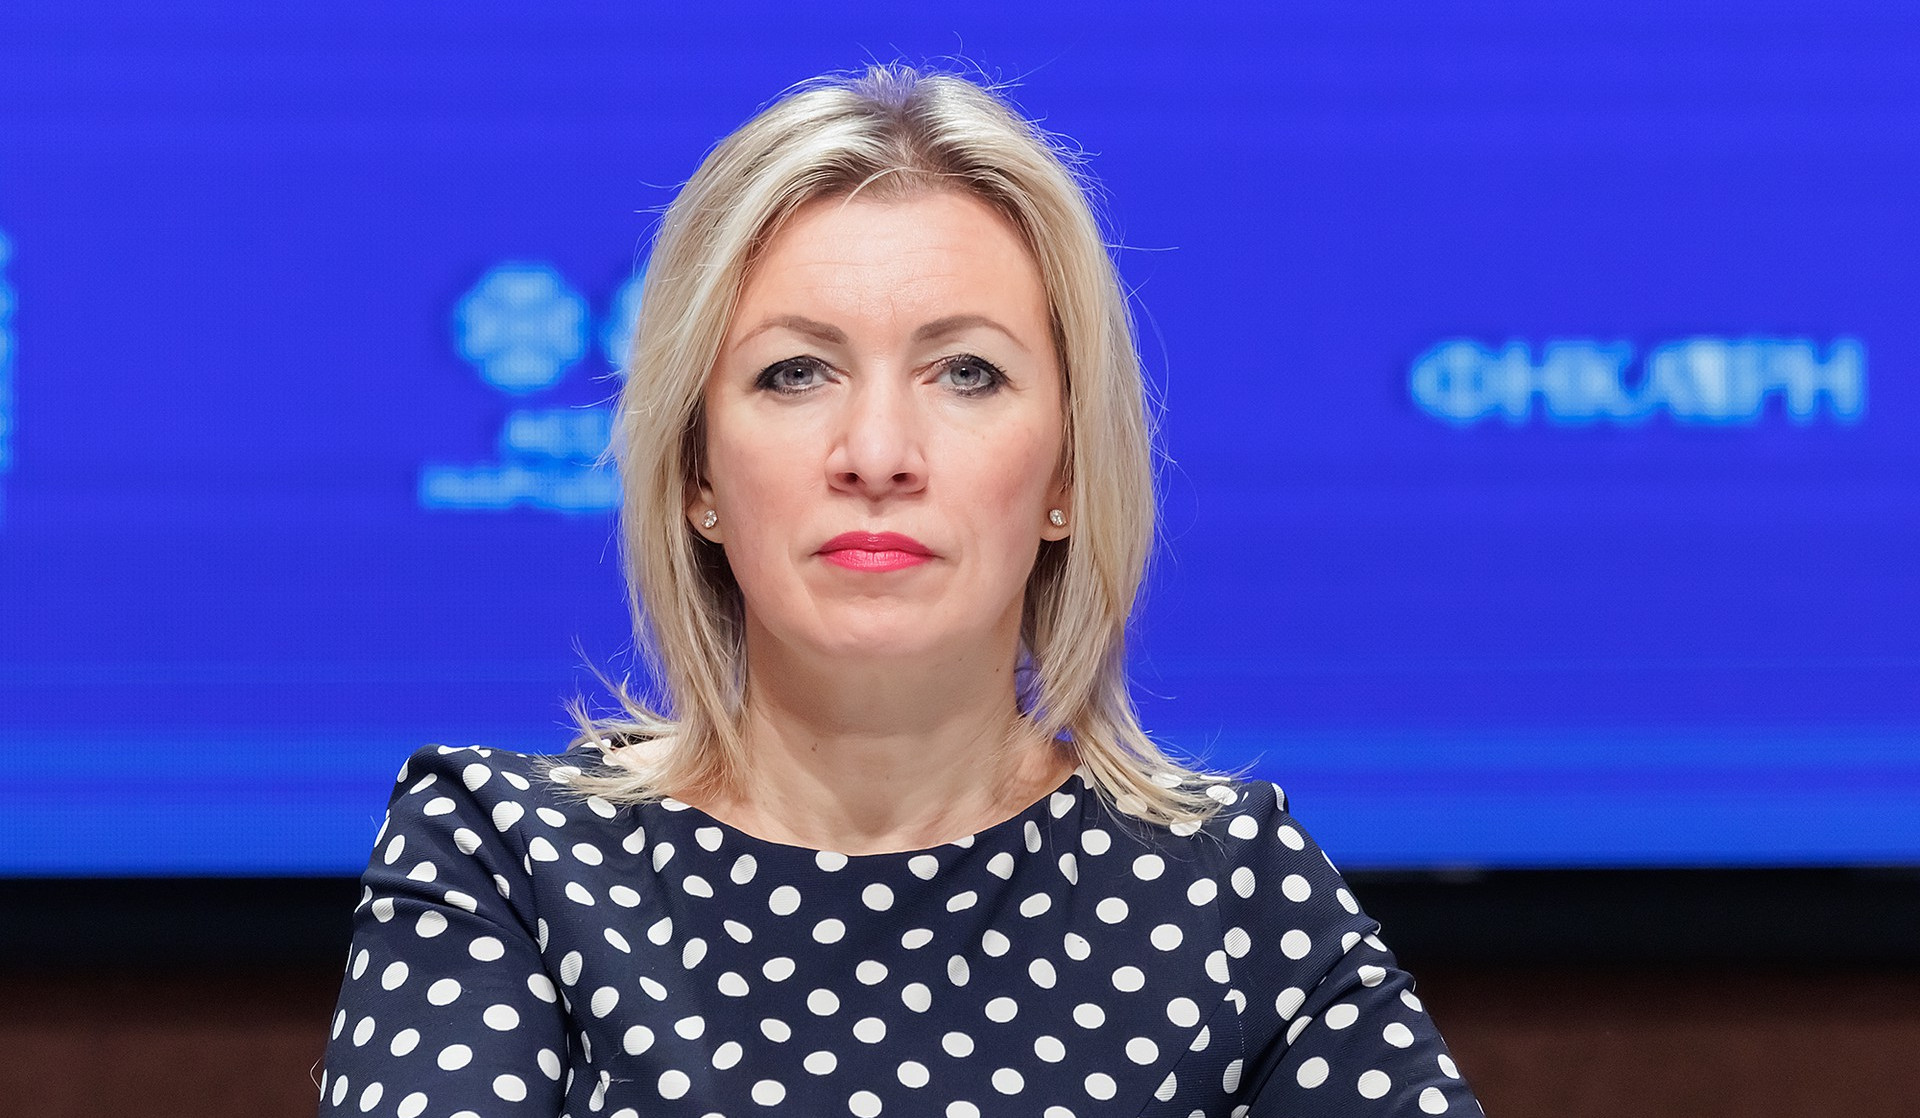 West issues Serbia ultimatum to choose-anything but Russia- Zakharova says